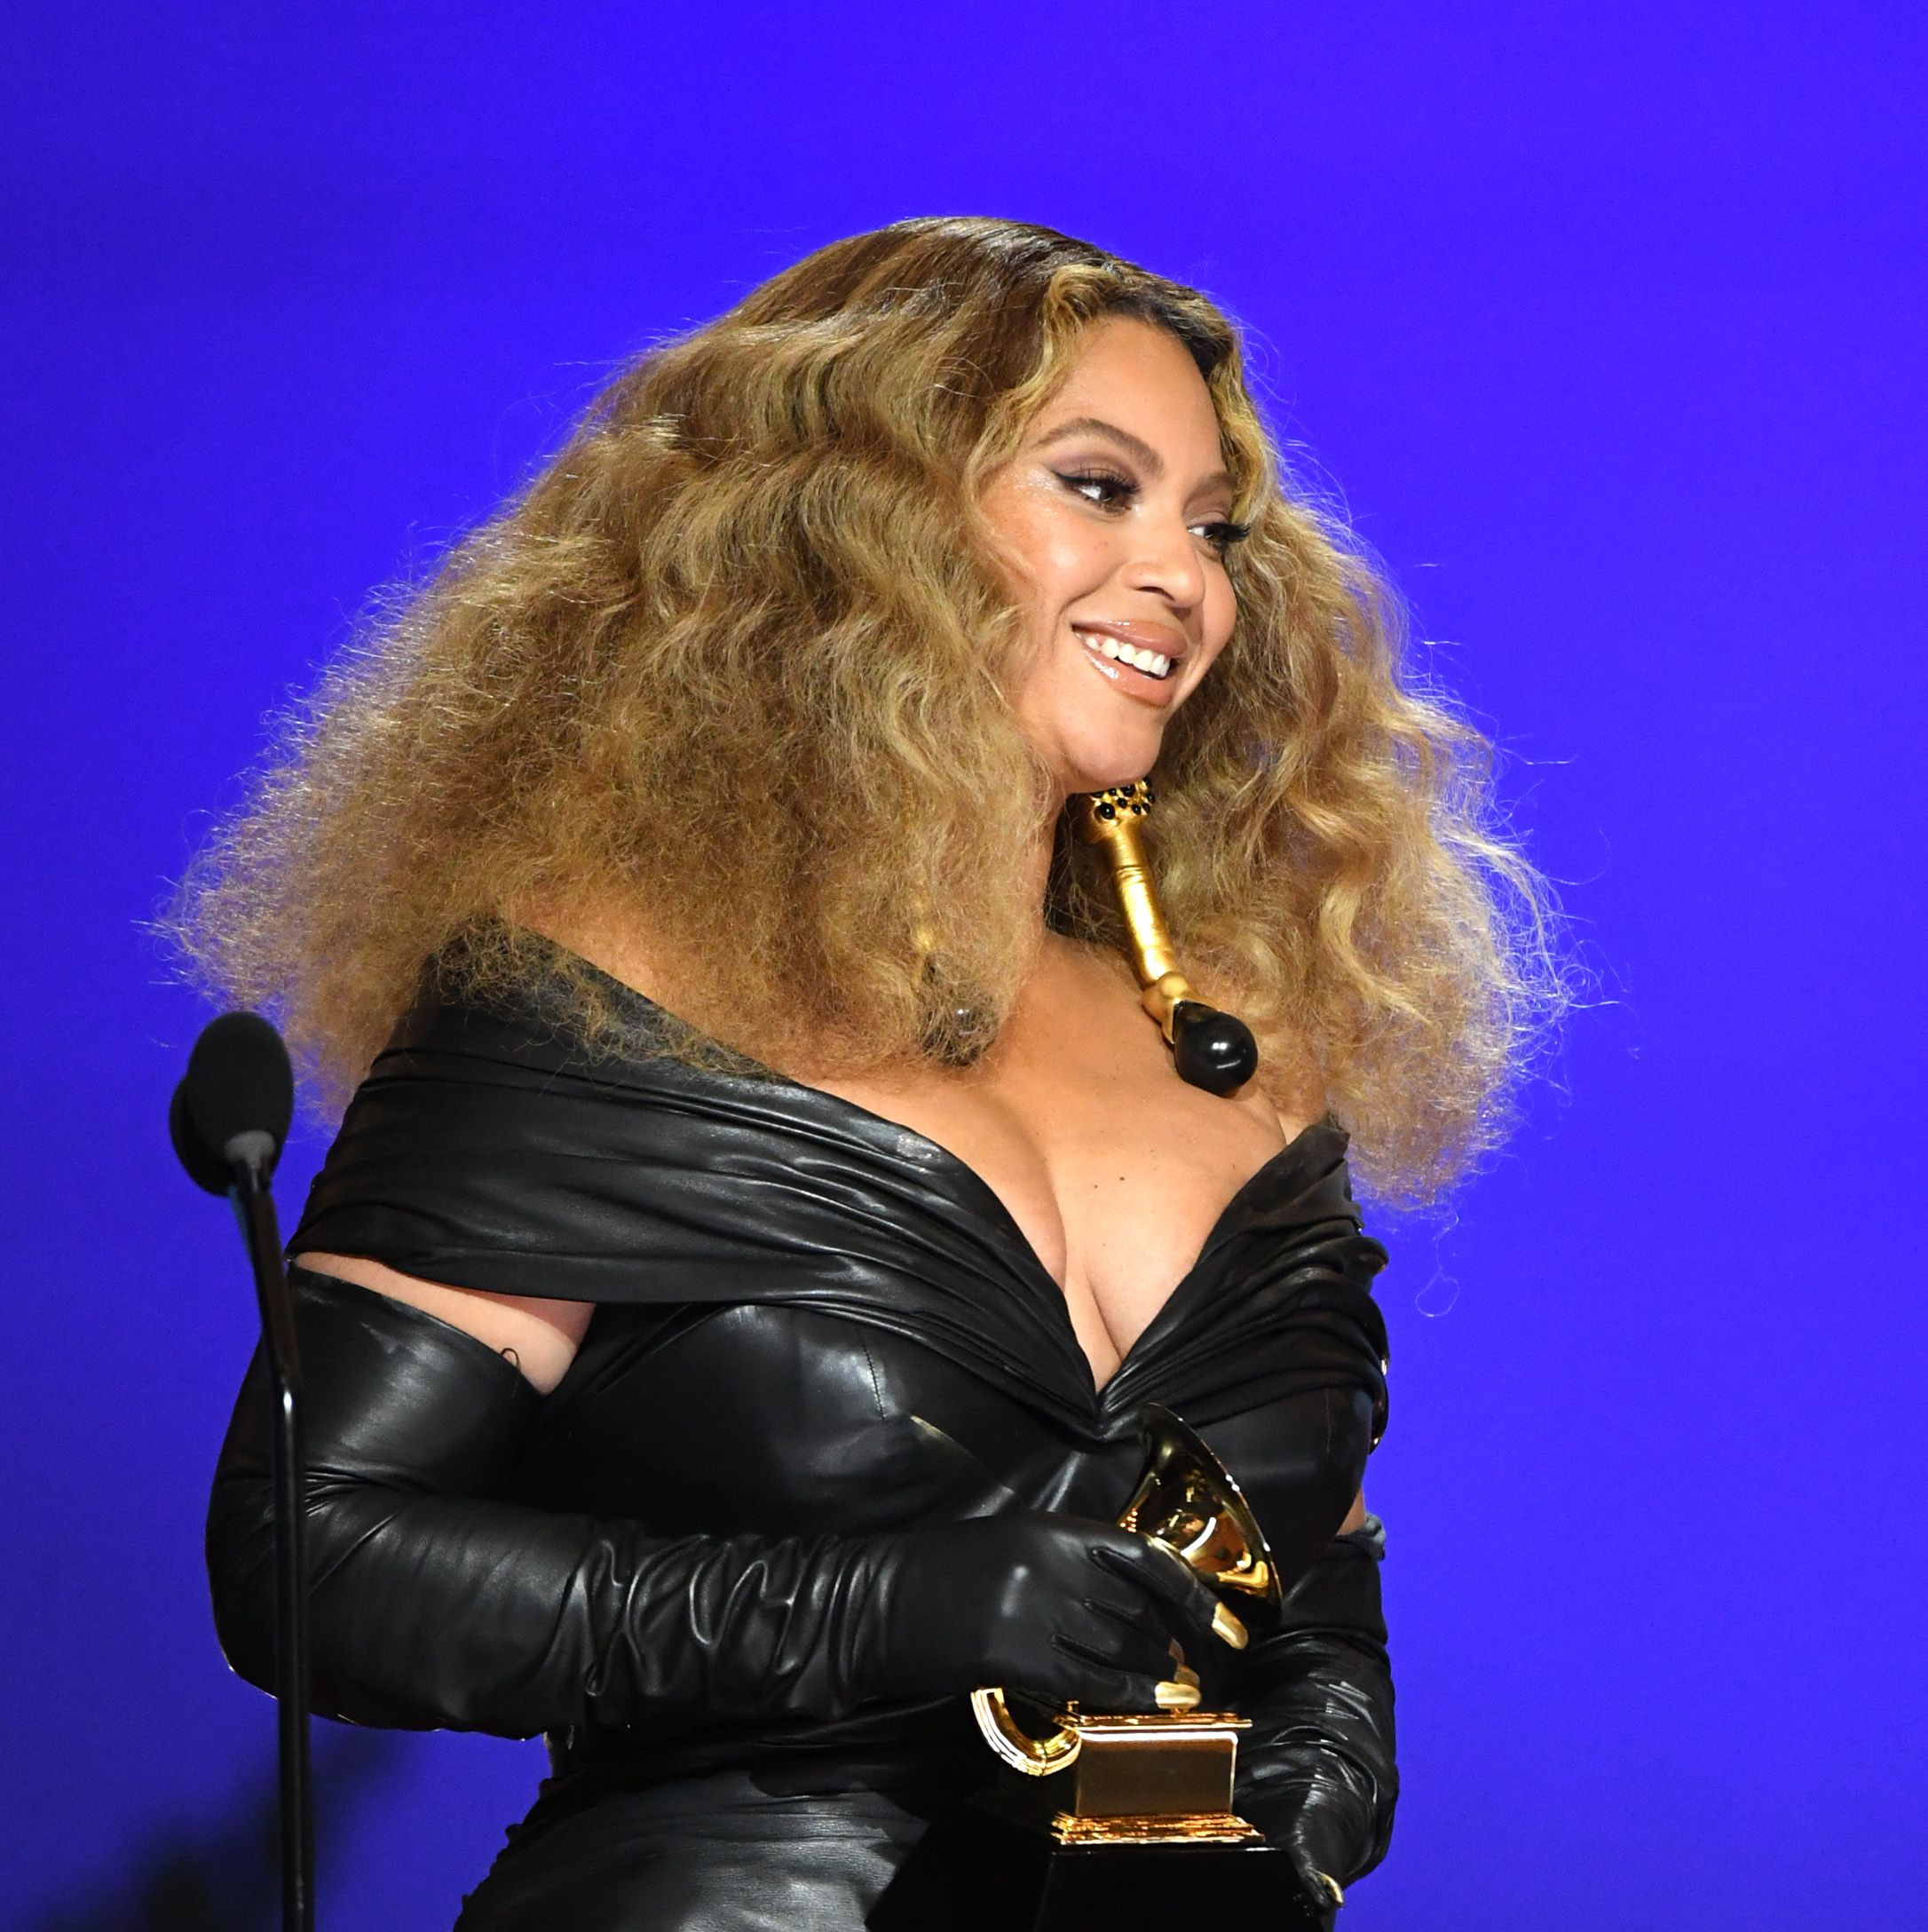 Trevor Noah explained on stage why Beyoncé missed her first acceptance speech of the evening.